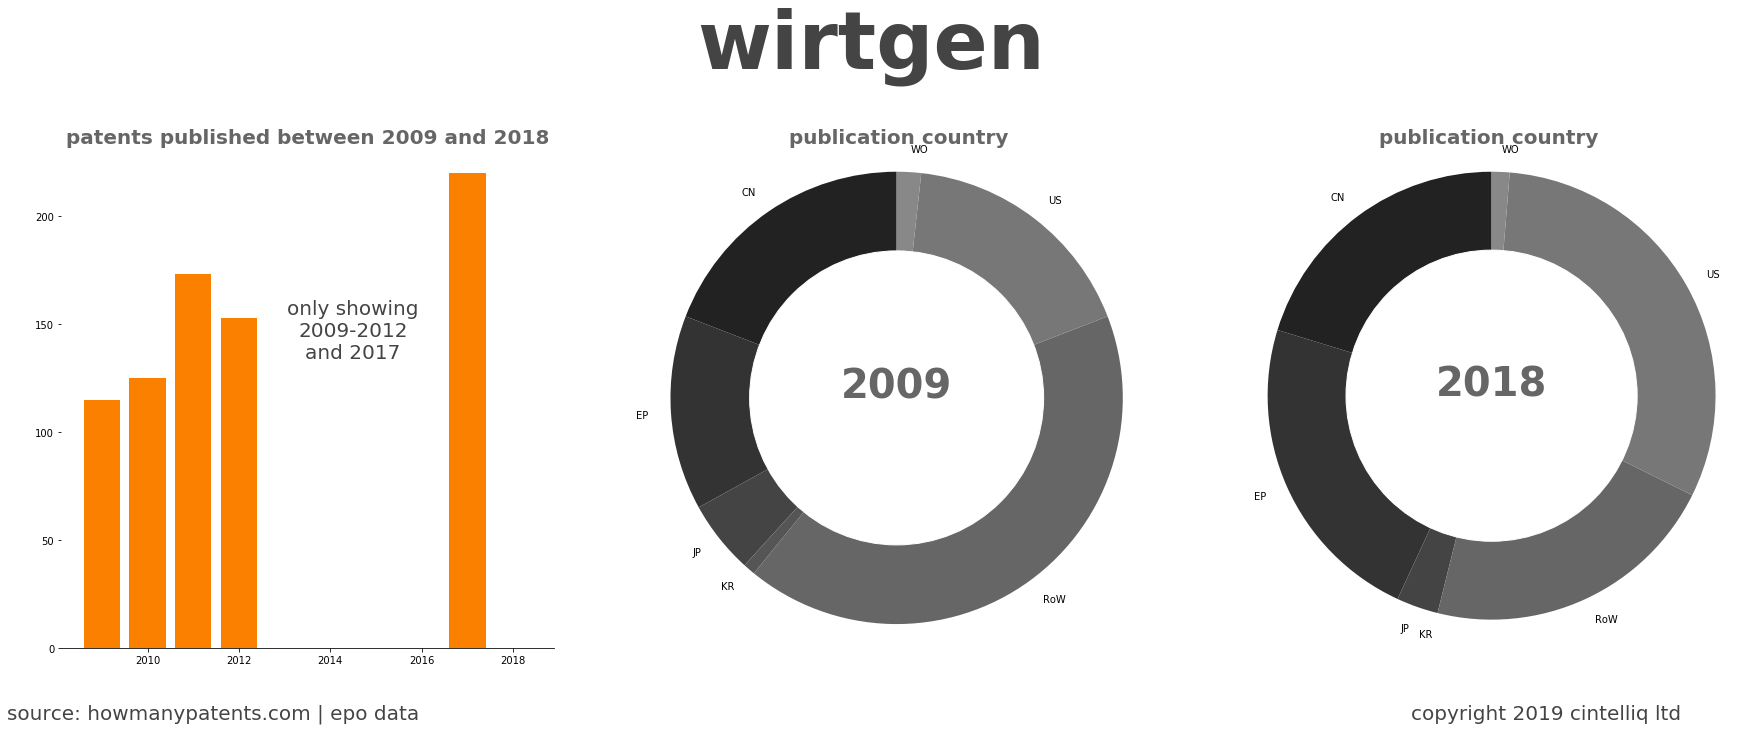 summary of patents for Wirtgen